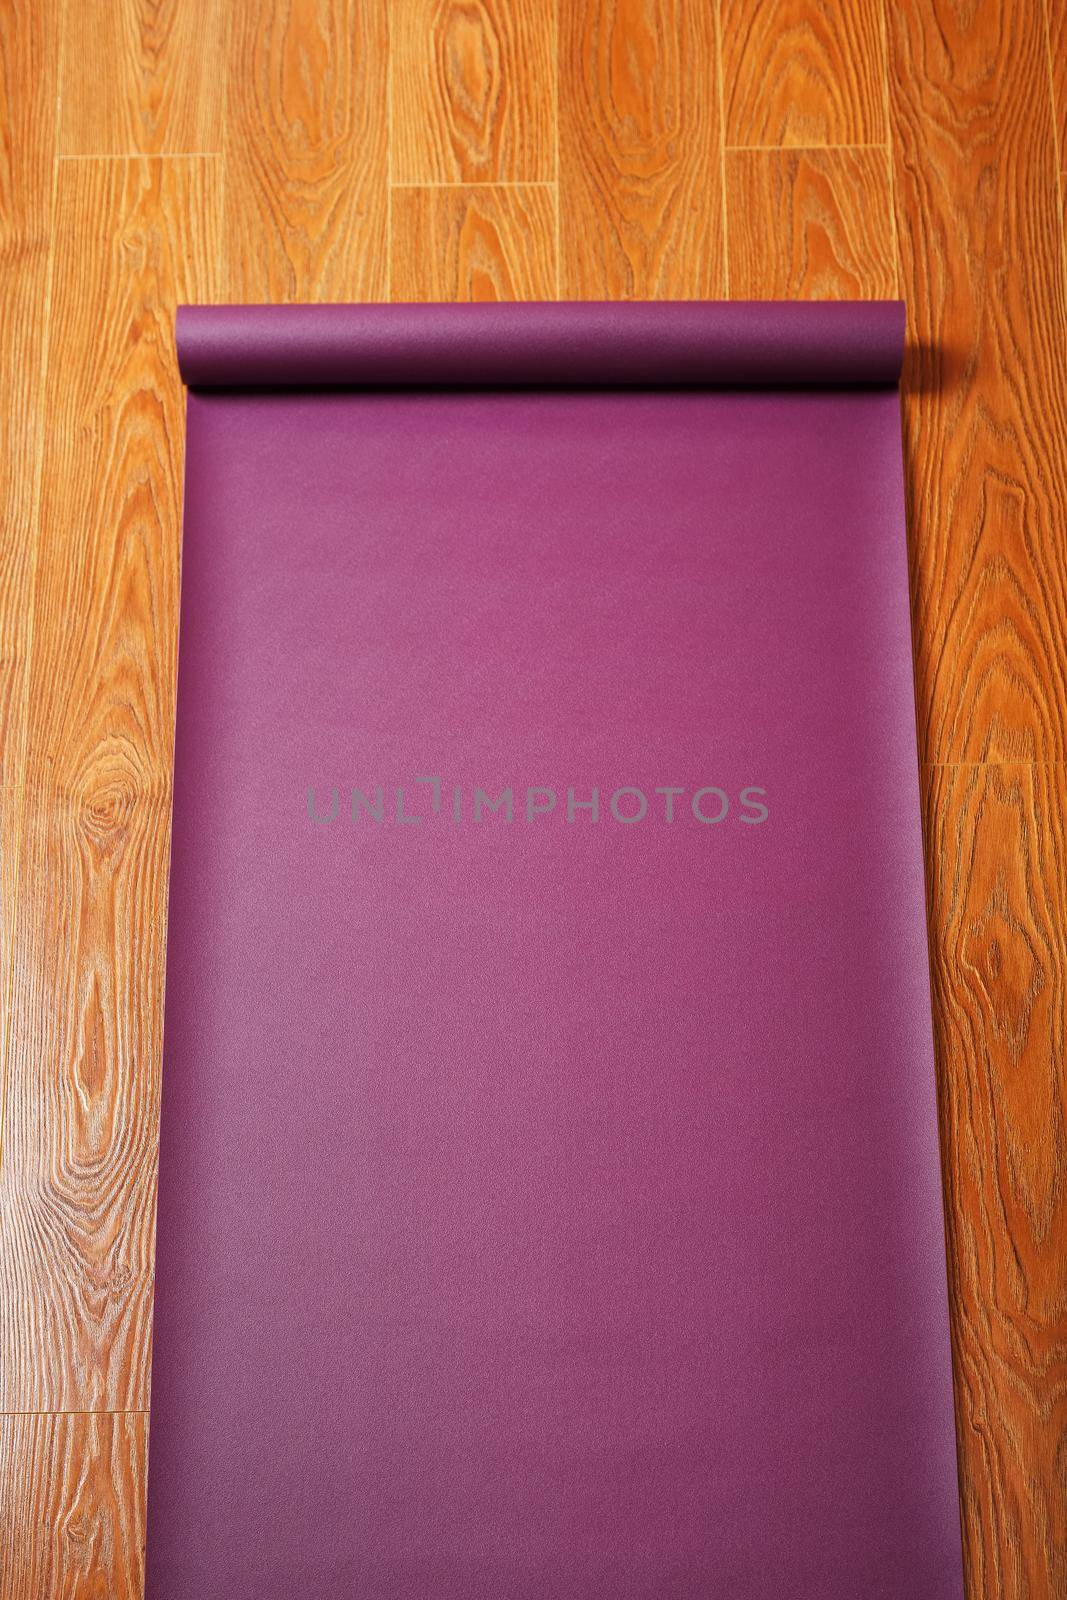 A lilac-colored yoga mat is spread out on the wooden floor with a Ganapati figurine by AlexGrec